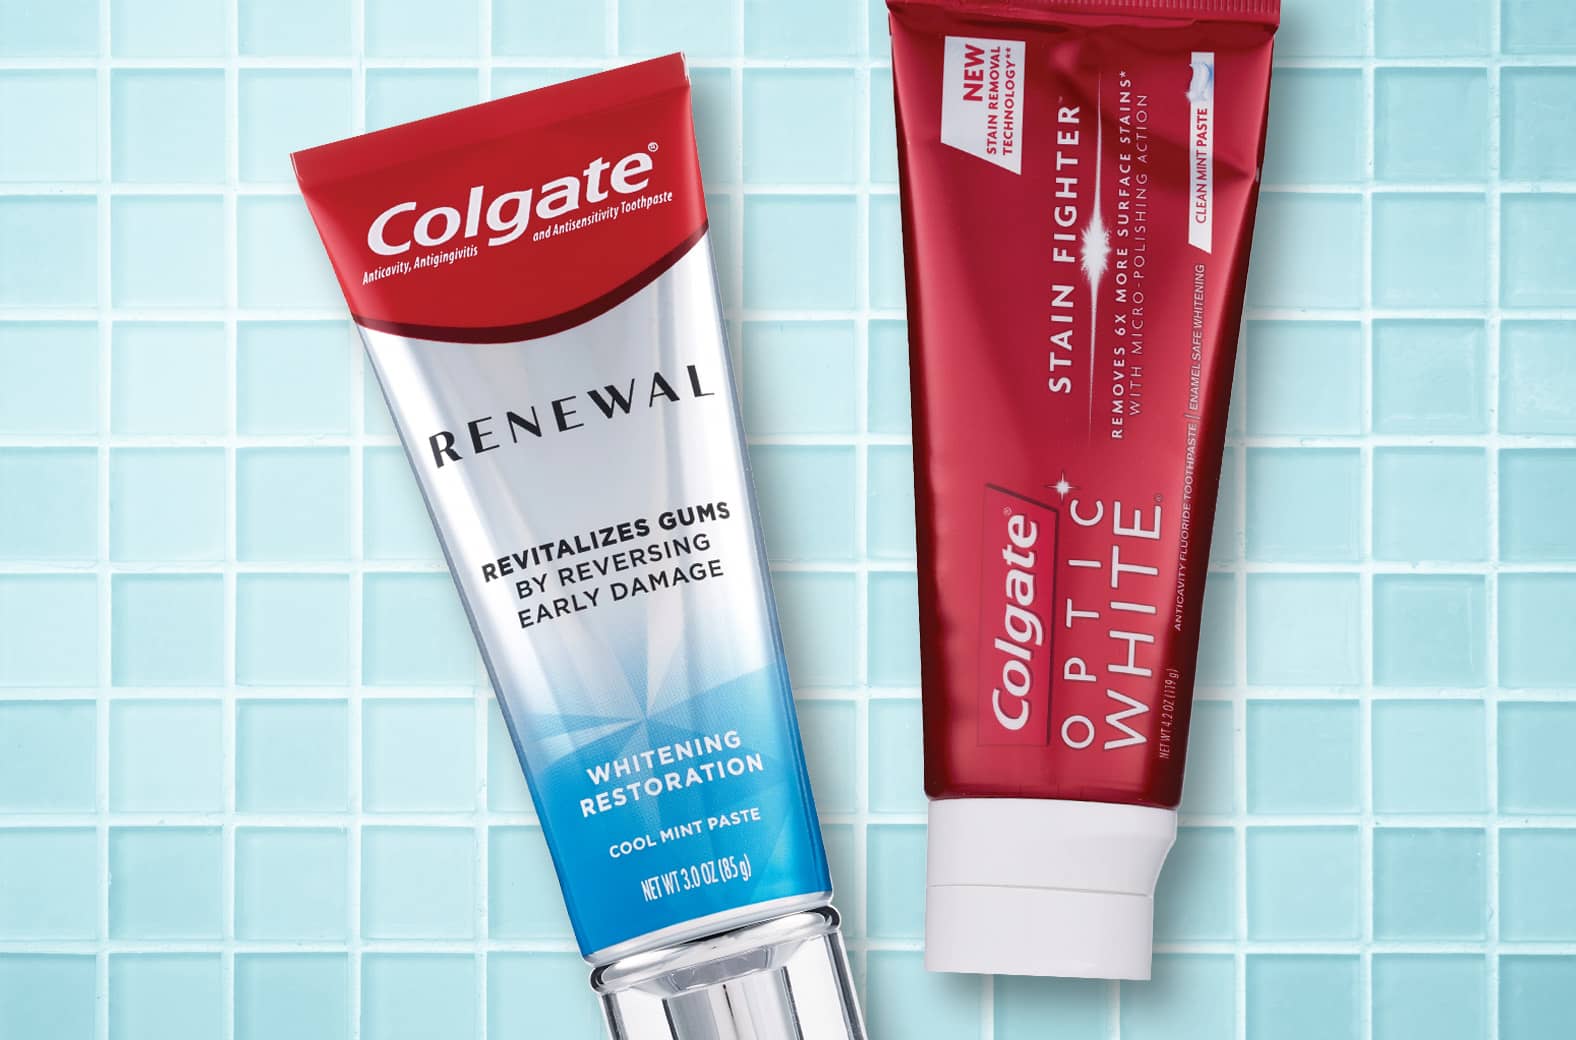 Colgate oral care products